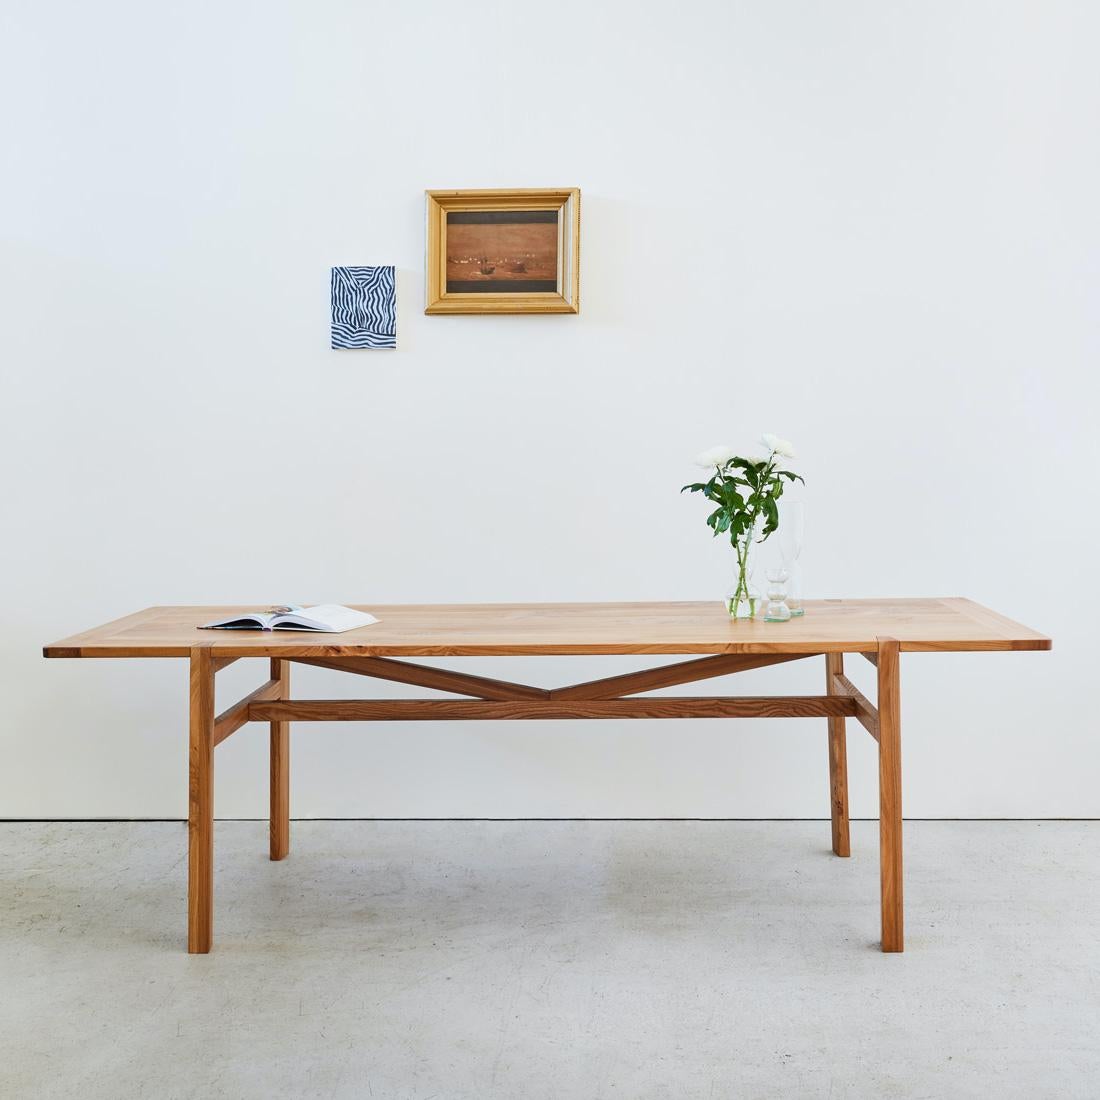 Marrying a rustic, truss-style structure with a lightweight form, the Sylvan table brings a contemporary touch to a classic farmhouse design.

The tabletop features breadboard ends which runs cross-grain to the main panel, adding both stability